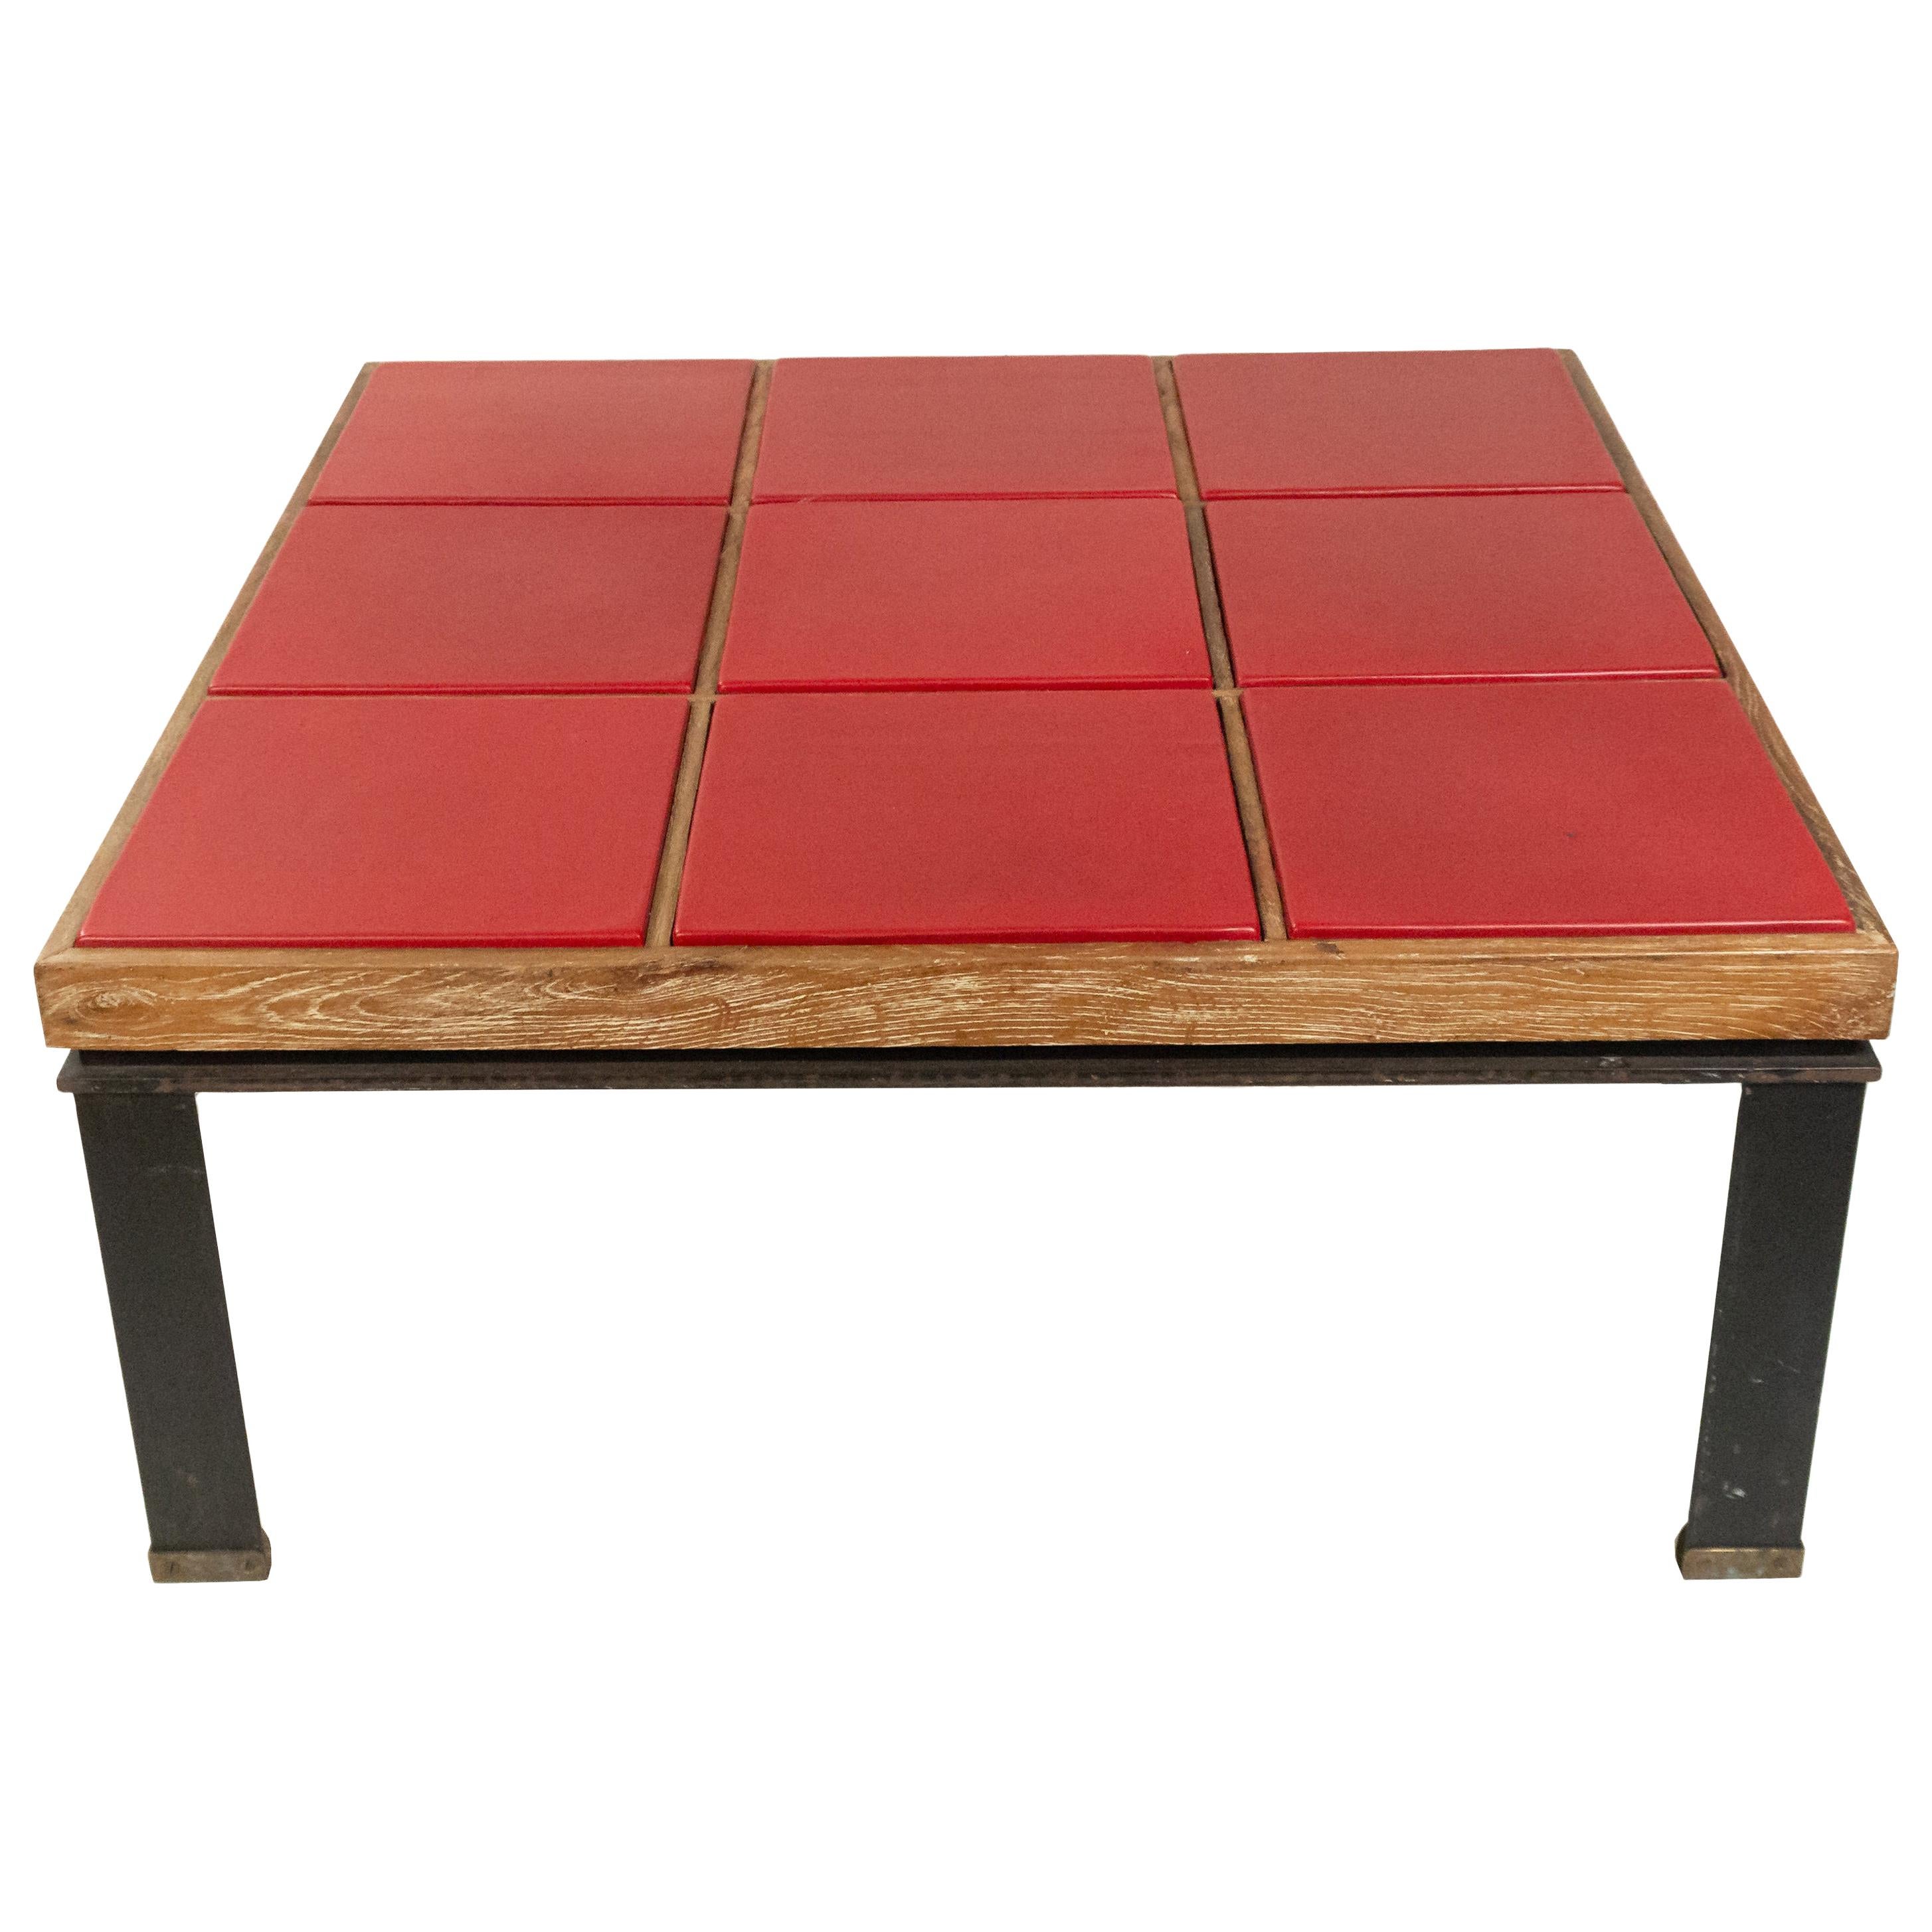 Sofa Table Side Table Wood Leather Ferrari Red-Coffee Table 40x40 cm H.50 